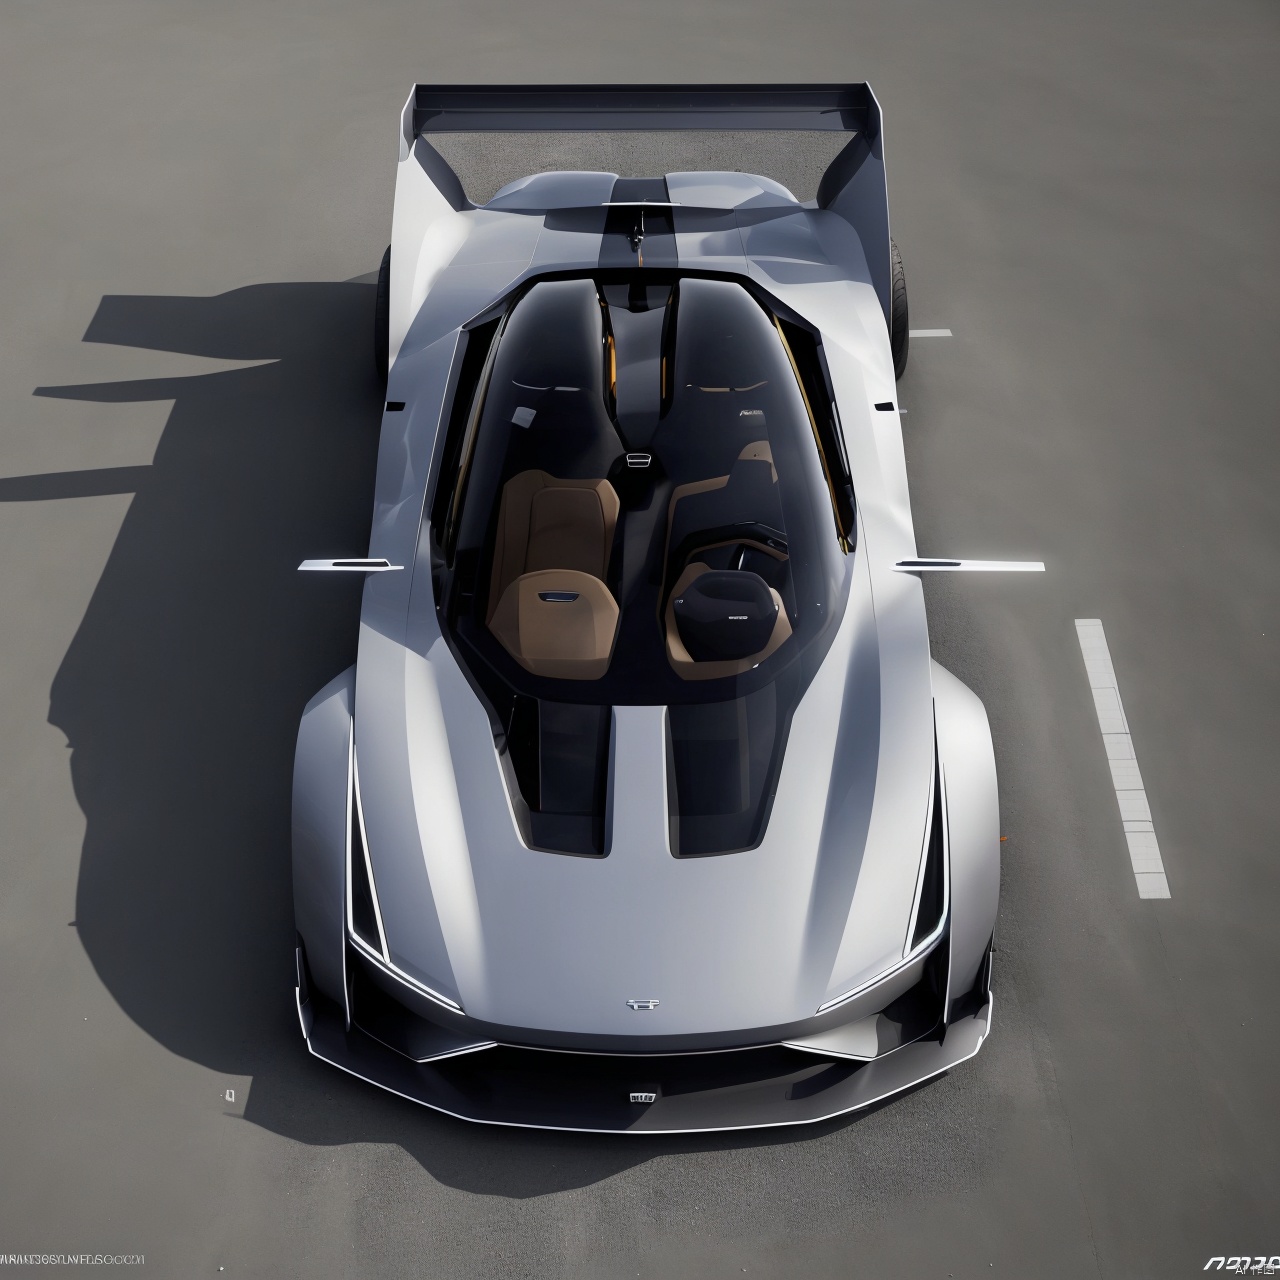 no humans, from above, ground vehicle, motor vehicle, science fiction, car, vehicle focus, sports car, Concept Car Design